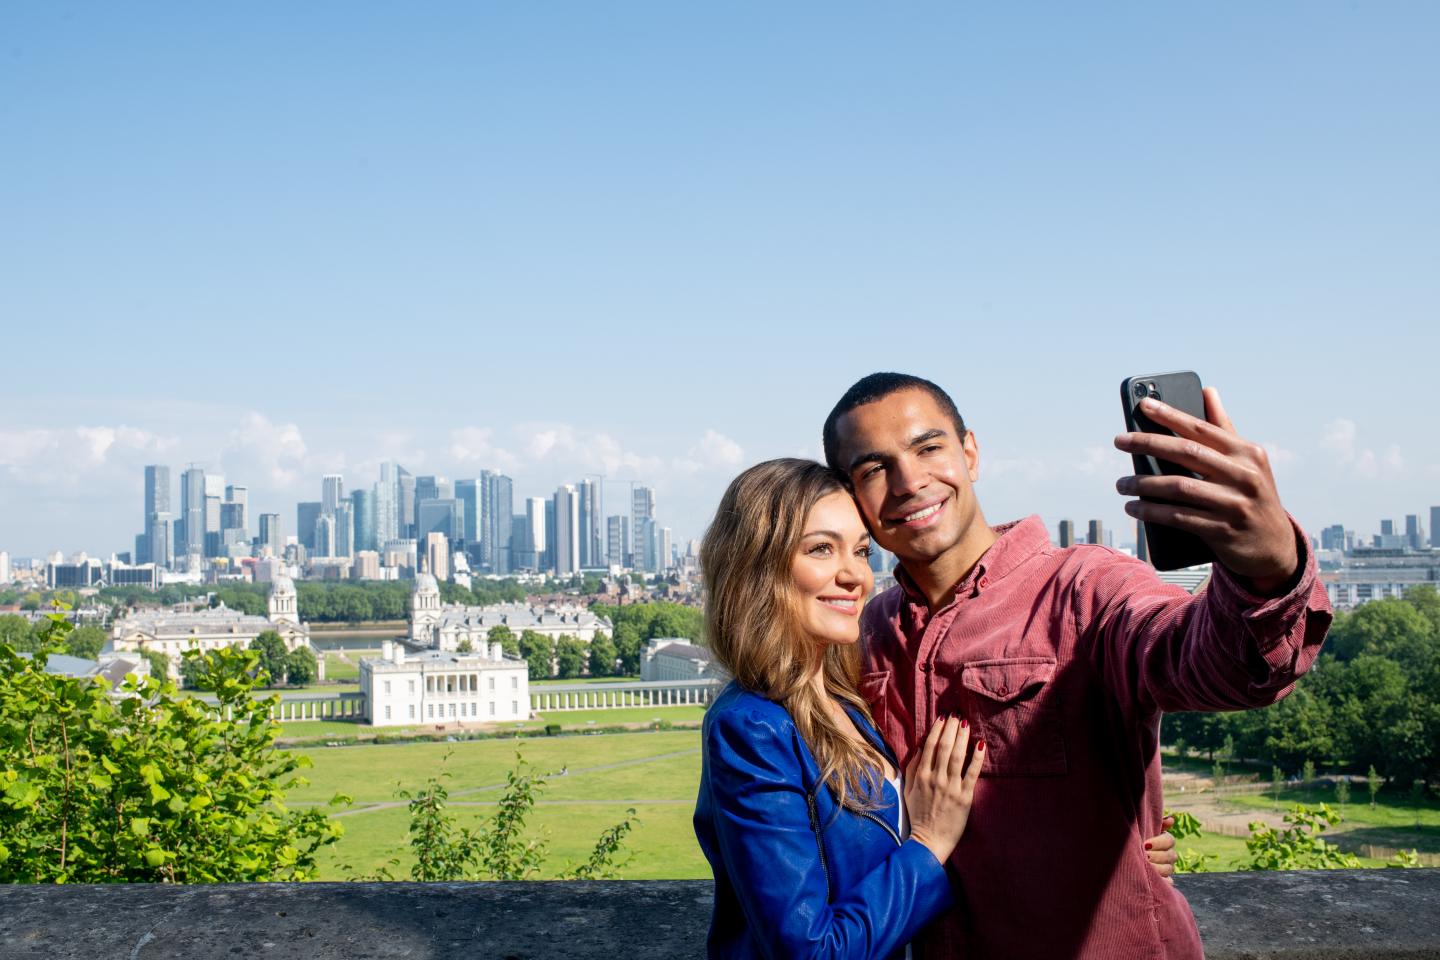 A man and a woman take a selfie at the top of Greenwich Park, with the River Thames and Canary Wharf in the background